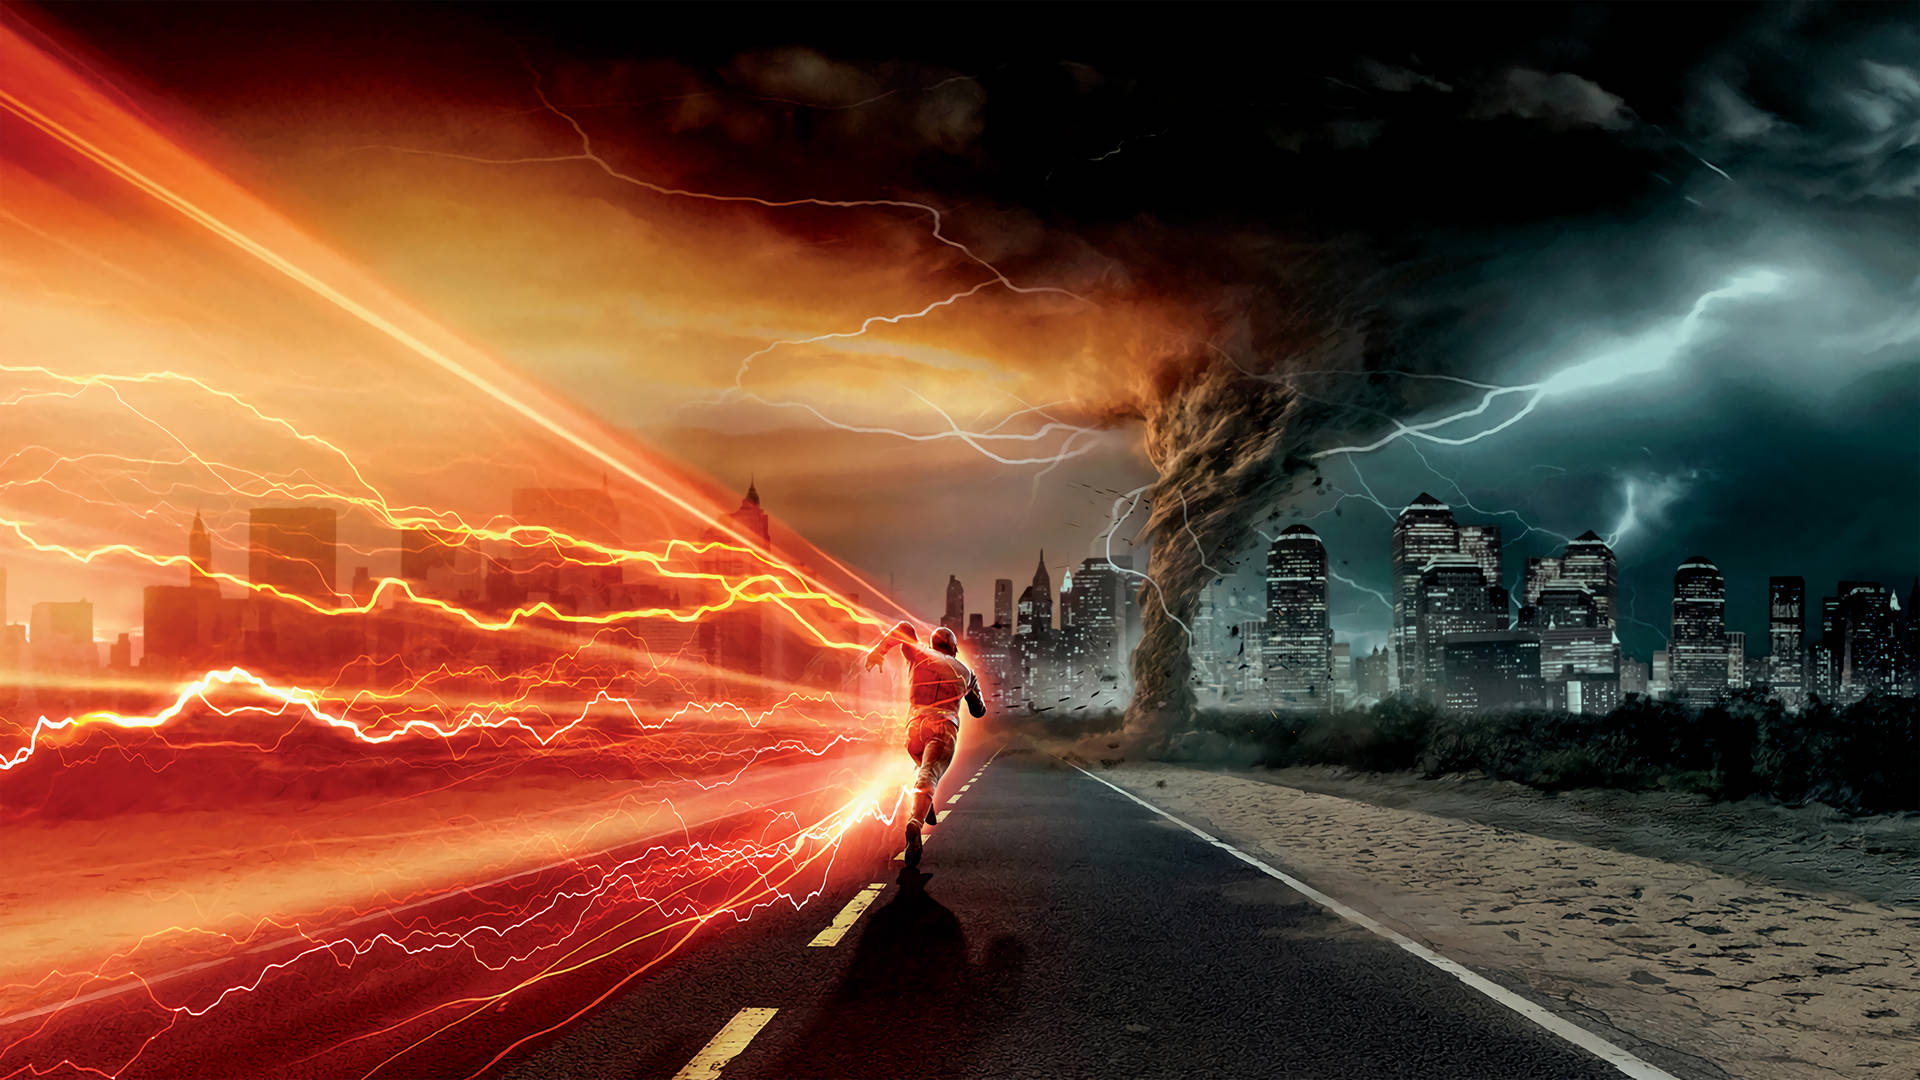 The Flash Running In Road Wallpaper